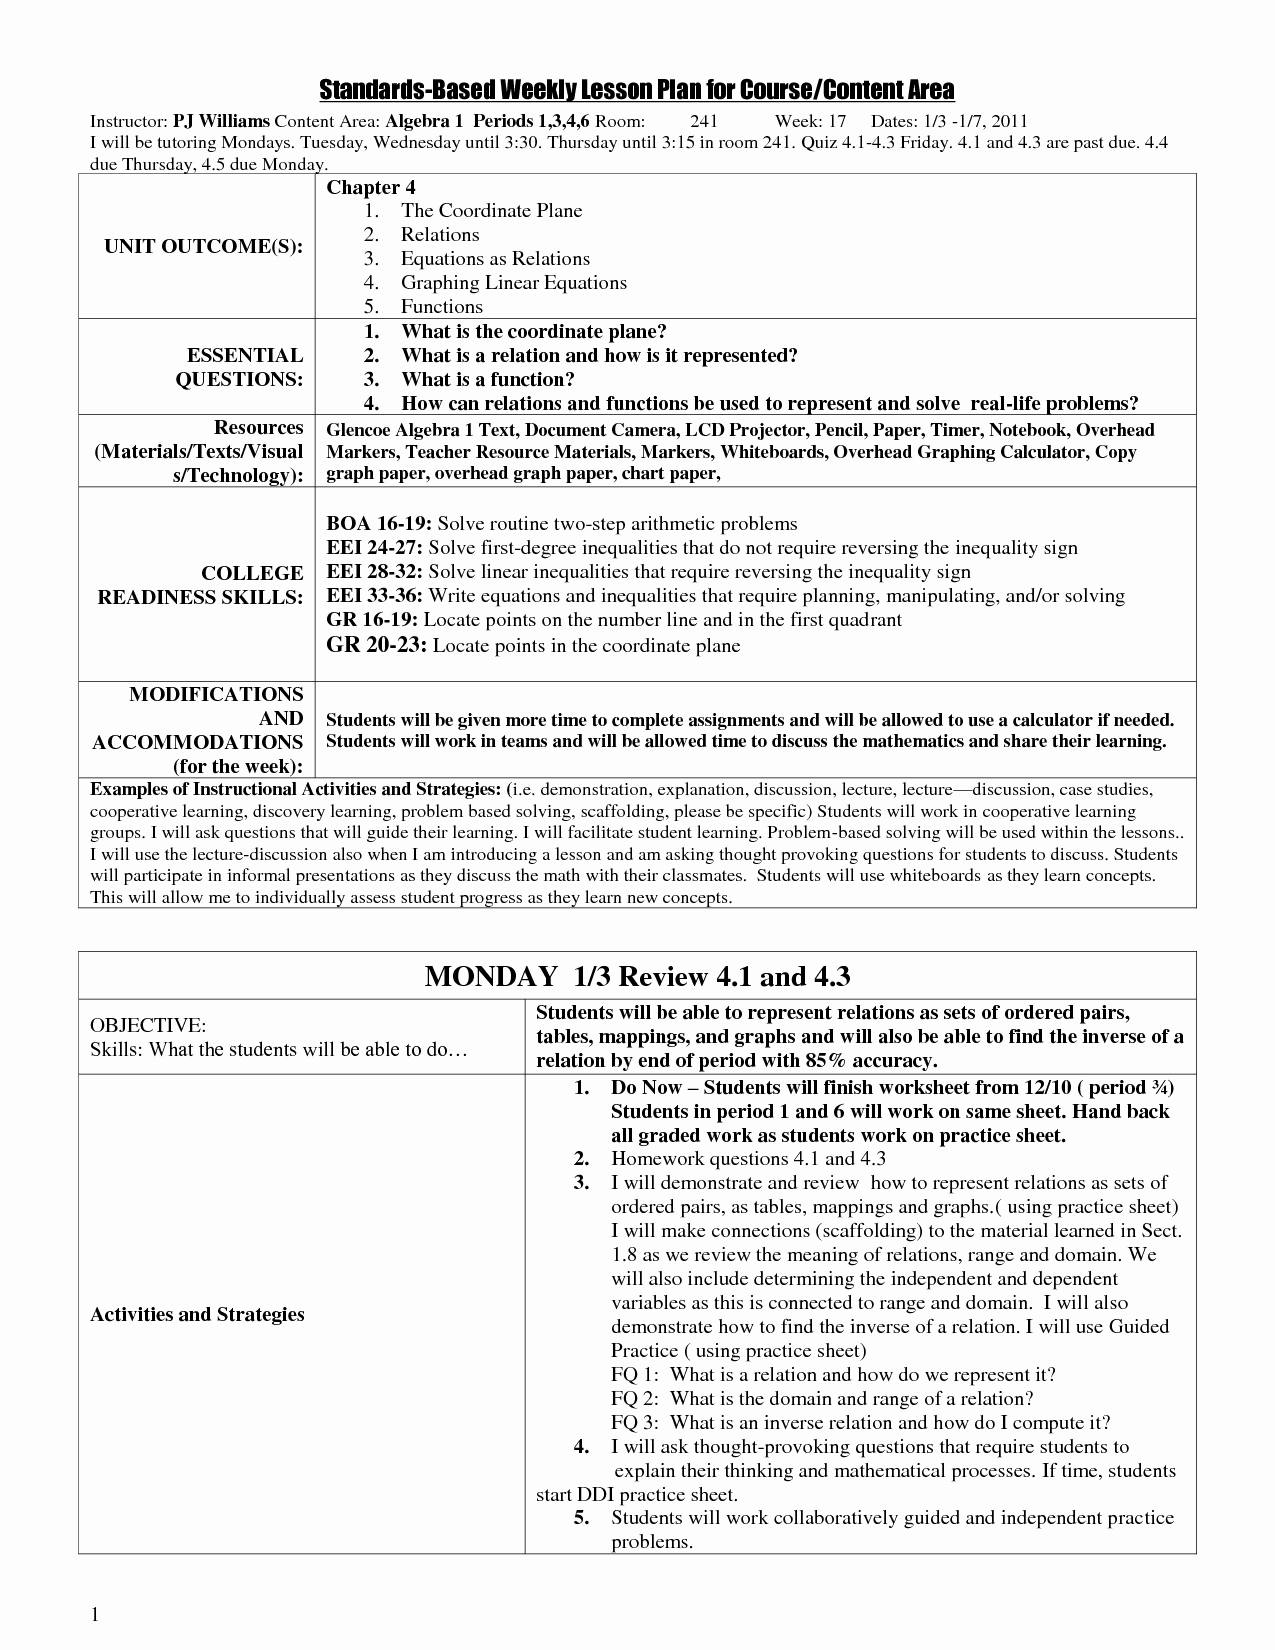 Standards Based Lesson Plan Template Awesome Best S Of Standards Based Lesson Plan format Standard Based Lesson Plans Template